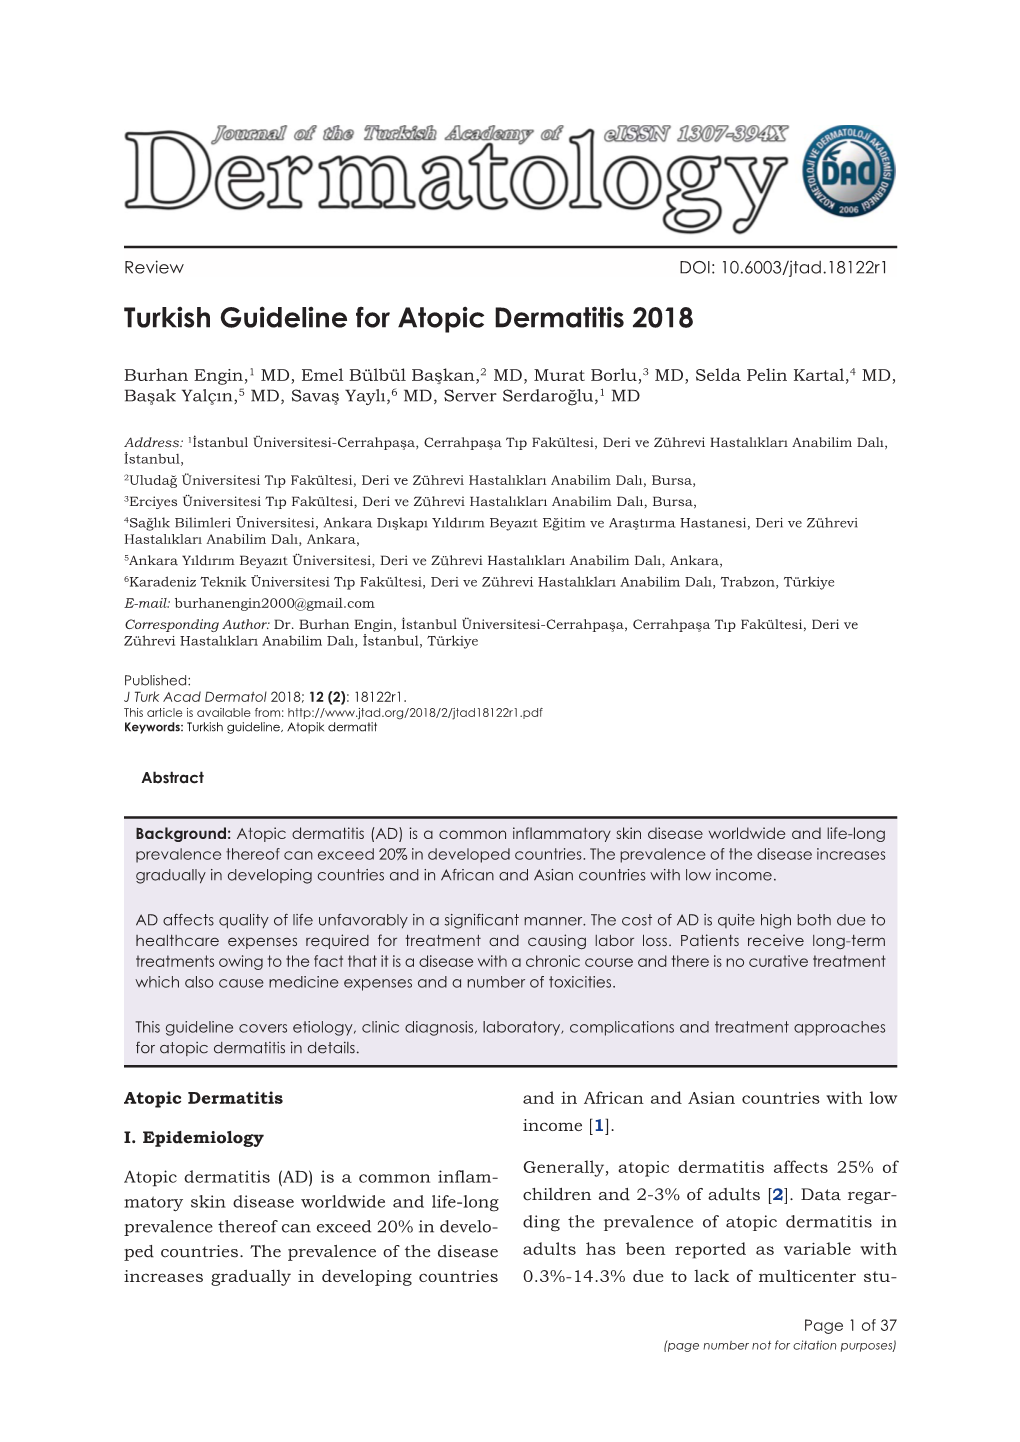 Turkish Guideline for Atopic Dermatitis 2018